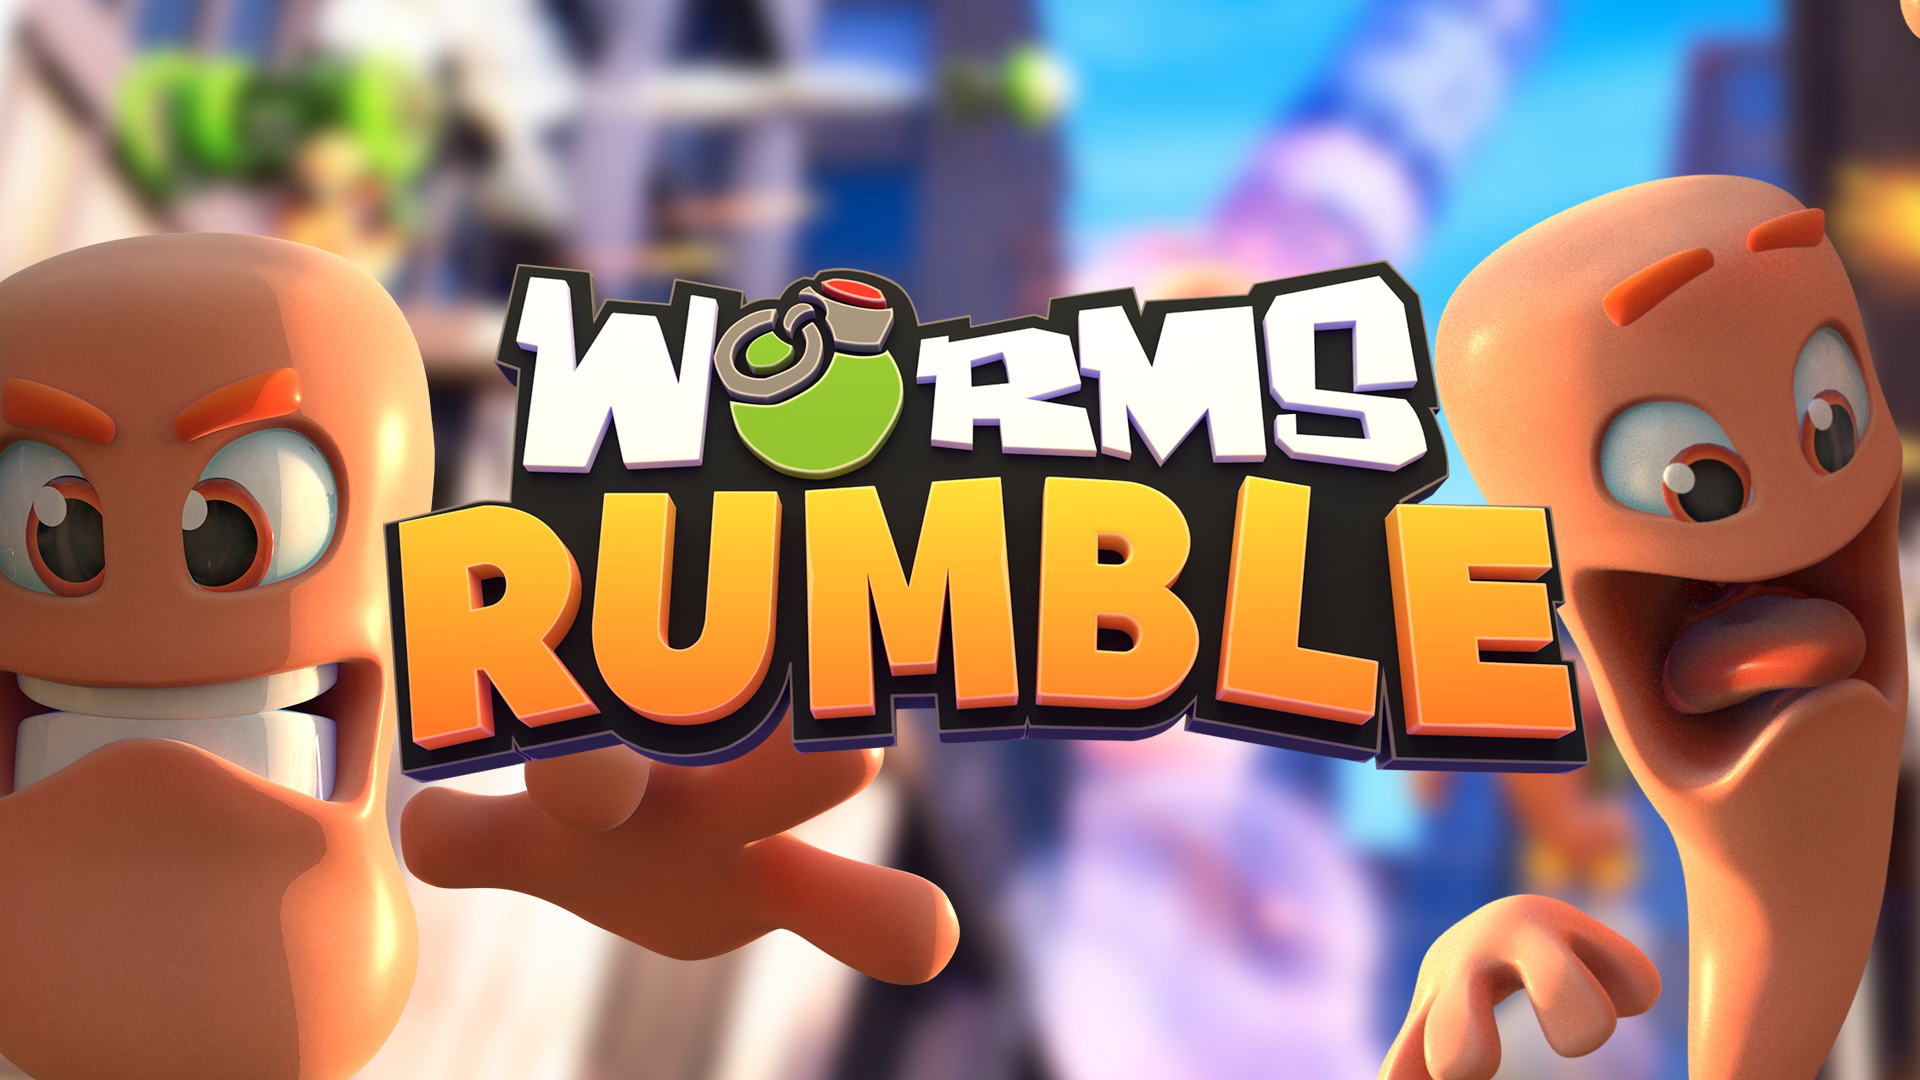 Worms Rumble Is Coming To Playstation Plus For Ps4 Ps5 Team17 Group Plc